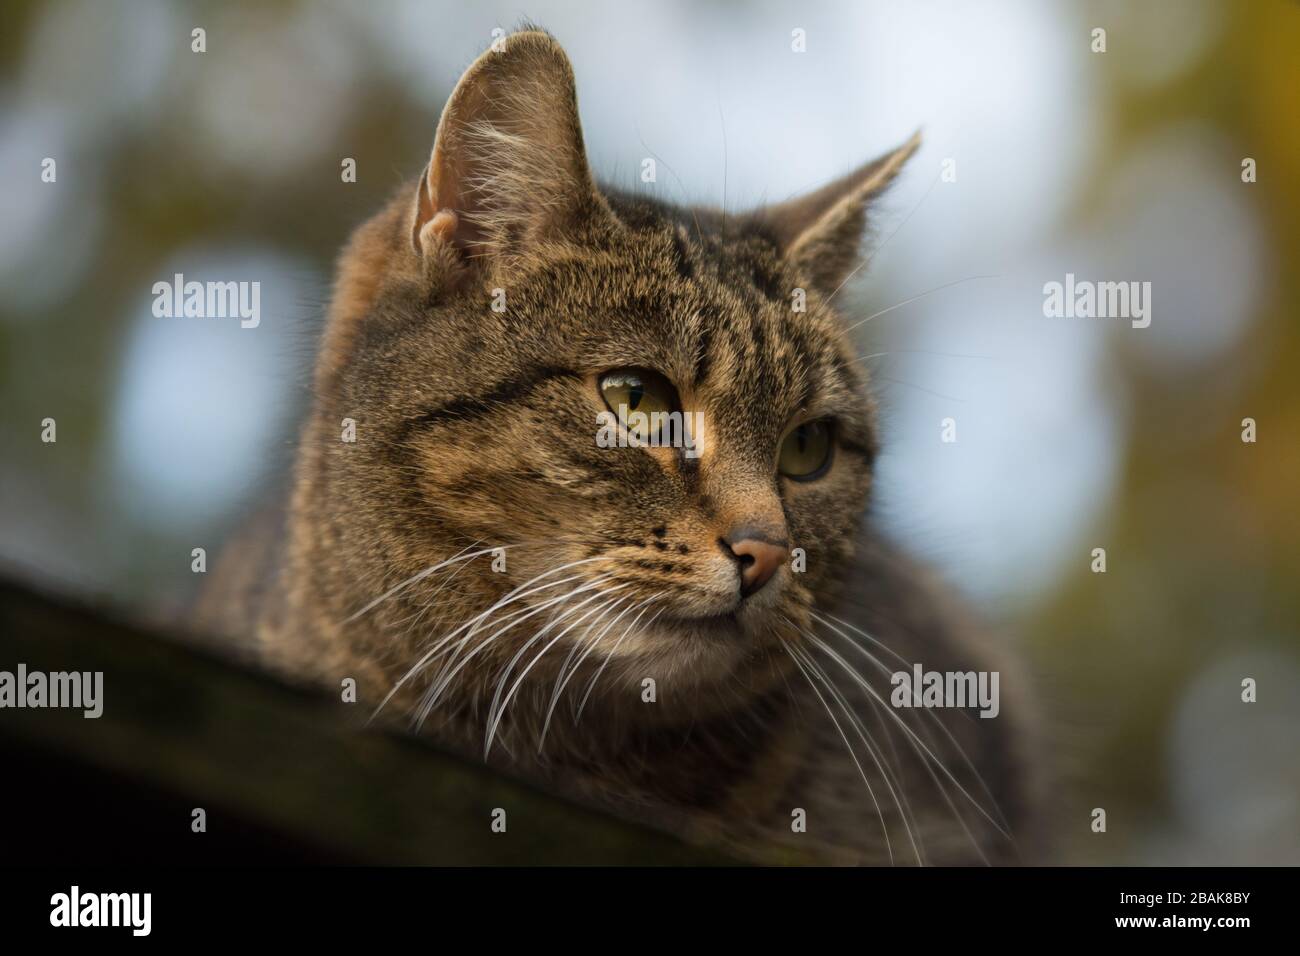 Close-up of a sprayed tabby cat with incision scar on her ear looking right Stock Photo